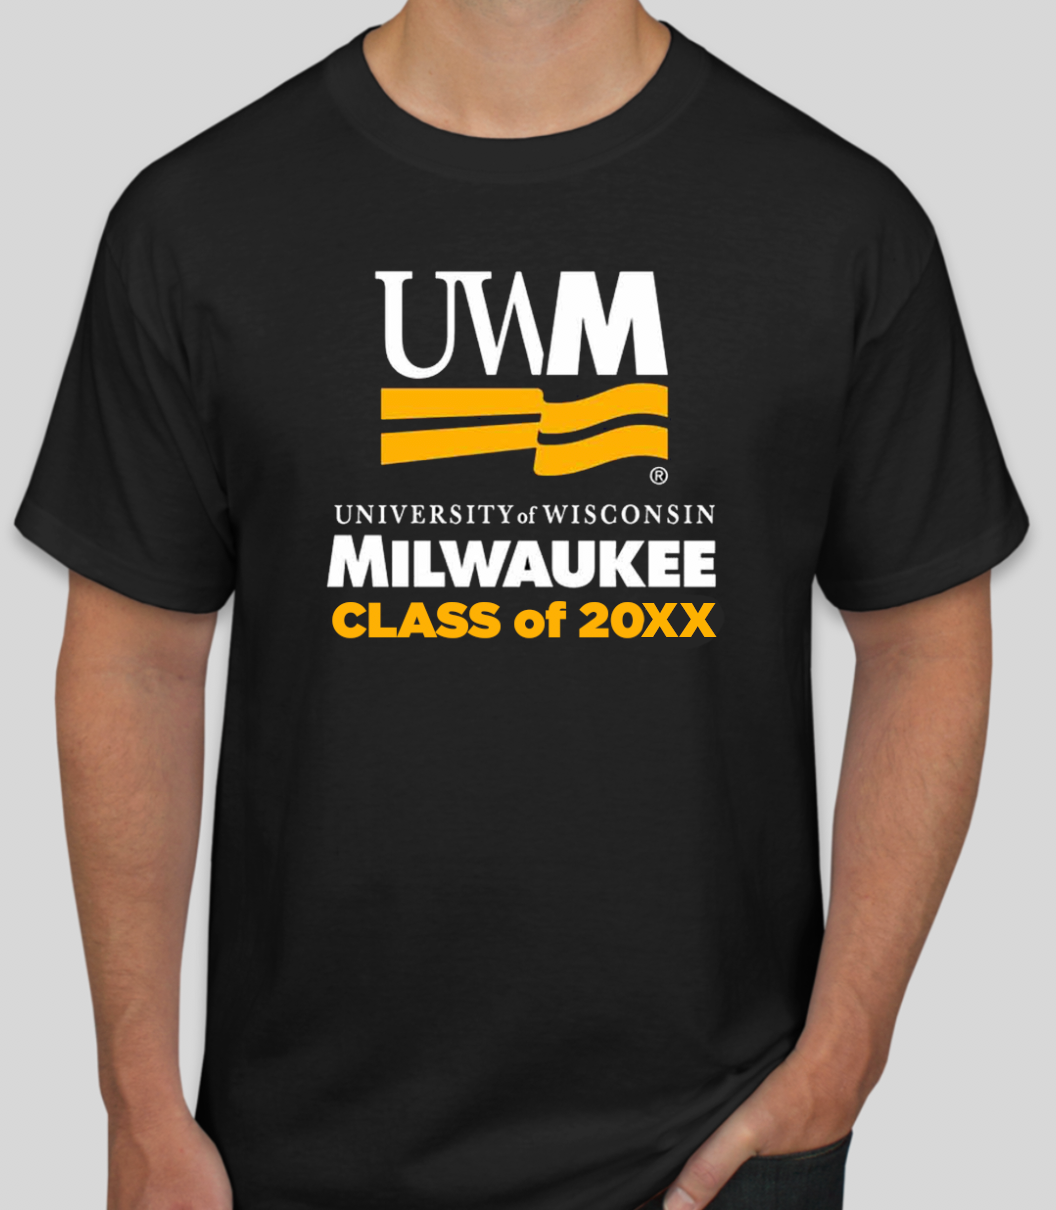 University of Wisconsin Milwaukee Commencement Group